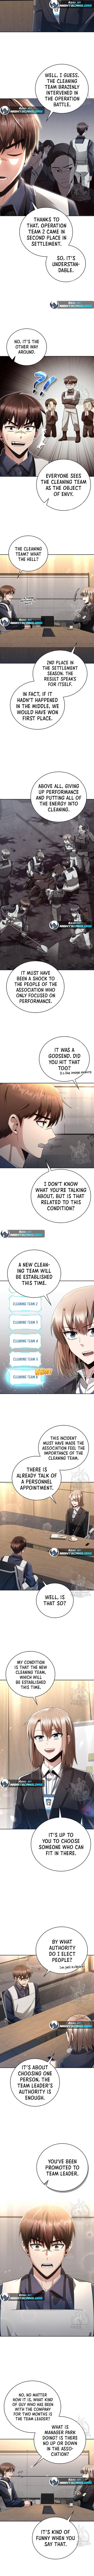 Clever Cleaning Life Of The Returned Genius Hunter Chapter 26